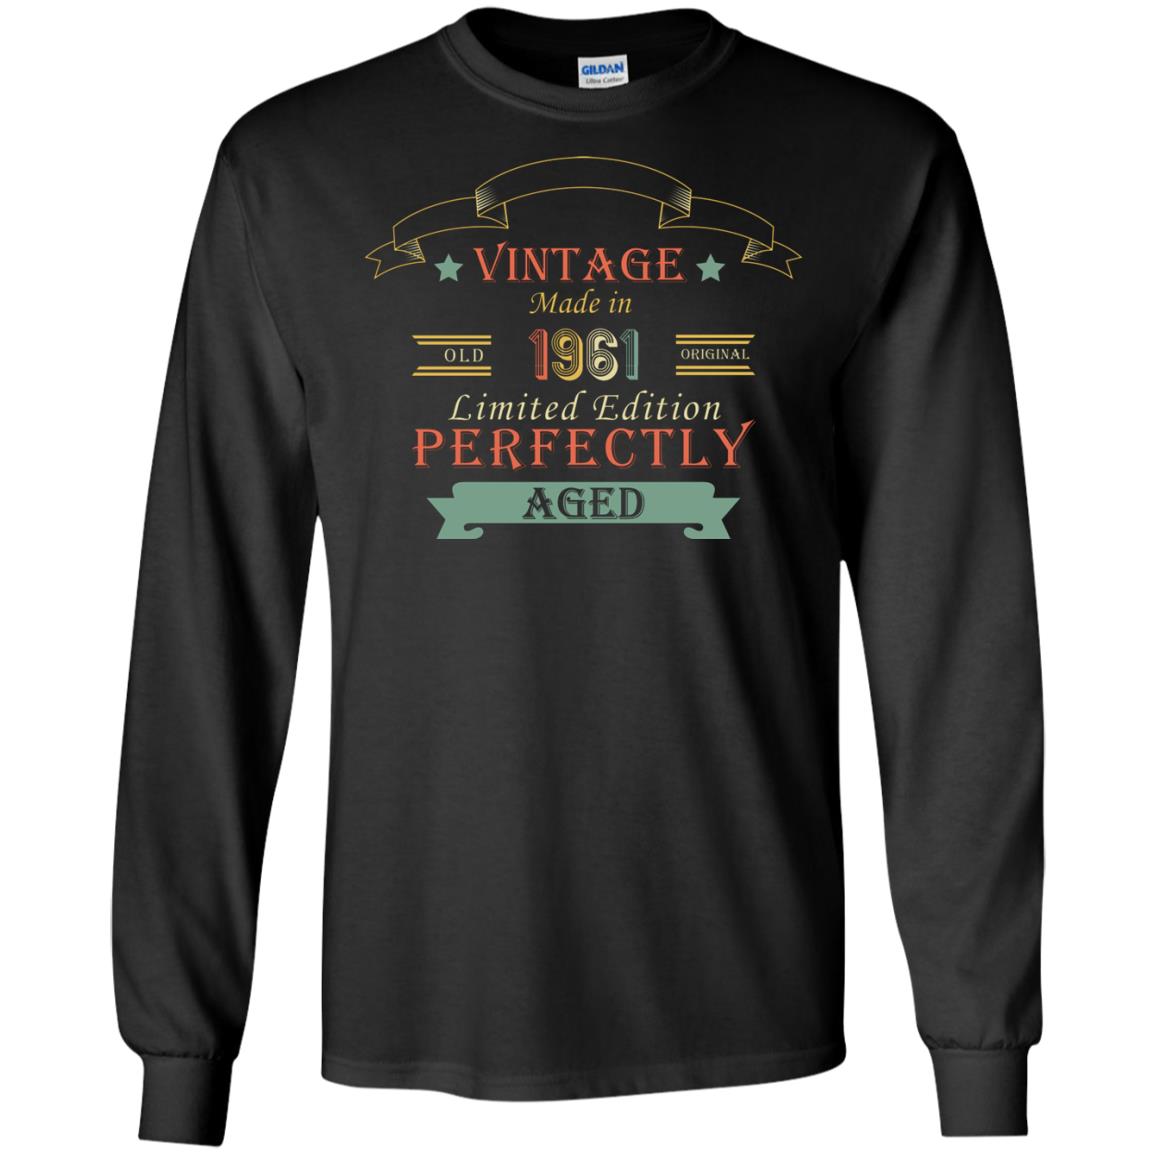 Vintage Made In Old 1961 Original Limited Edition Perfectly Aged 57th Birthday T-shirtG240 Gildan LS Ultra Cotton T-Shirt